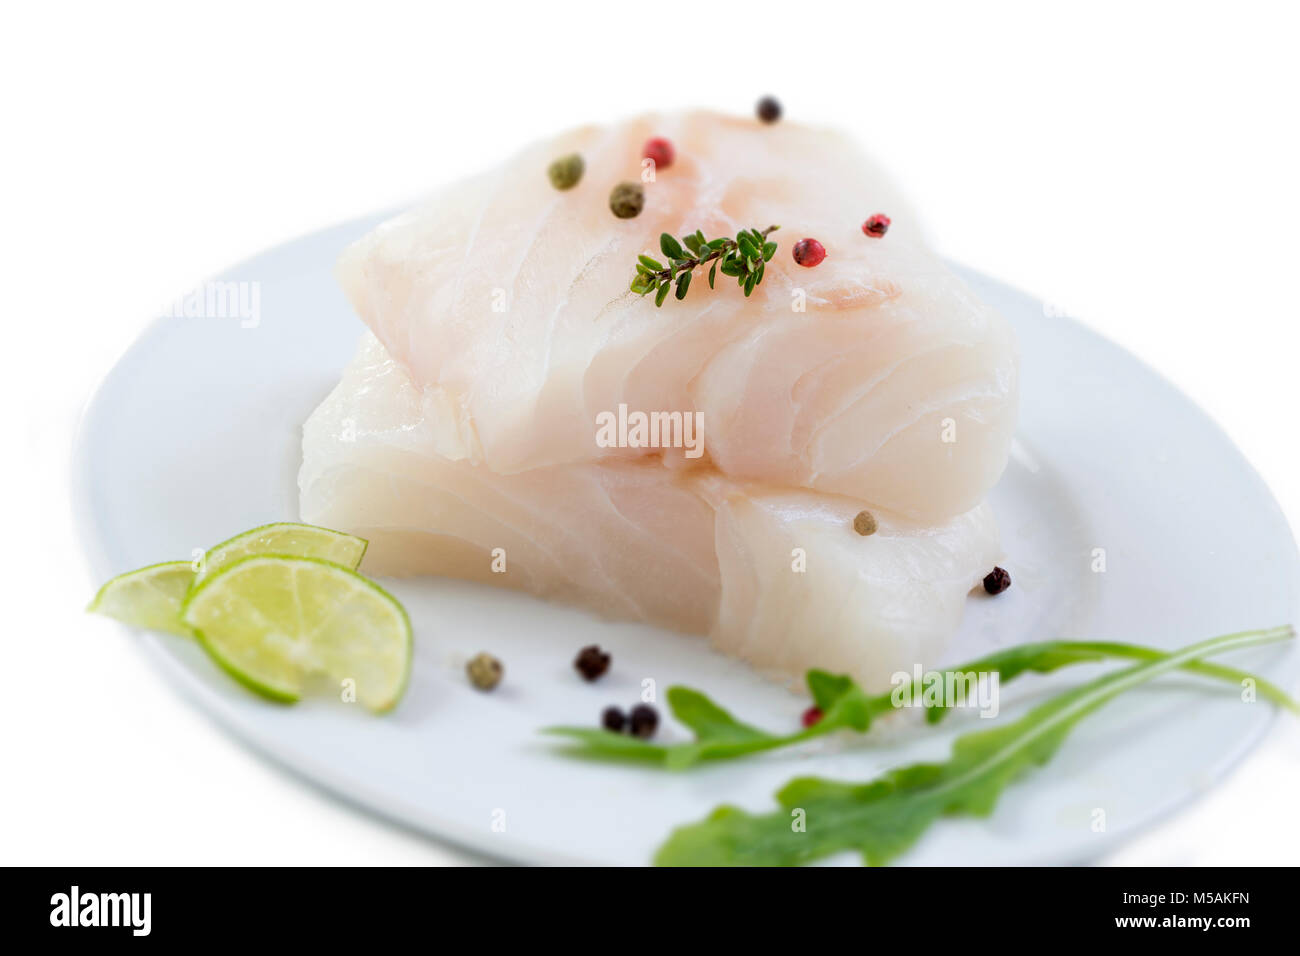 Fresh raw cod fish fillet on a plate with parsley and lemon isolated against white background Stock Photo